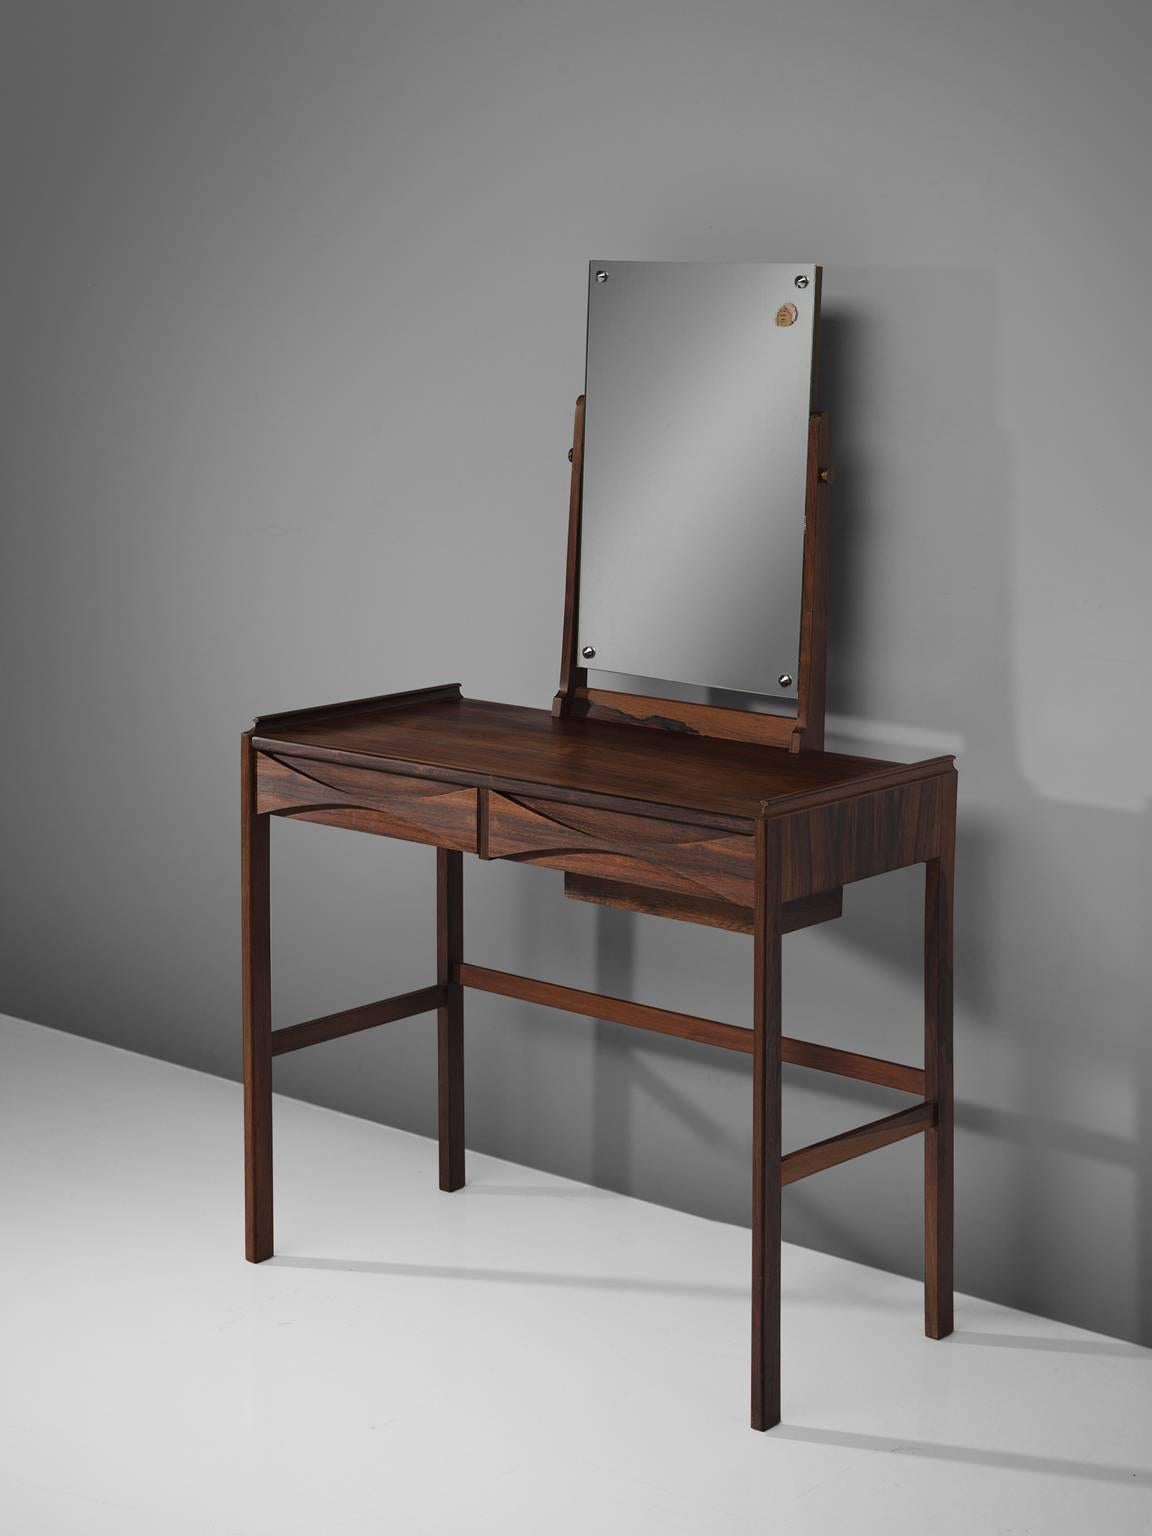 Arne Vodder, dressing table, rosewood, mirror, Denmark, 1950s.

This refined, delicate dressing table is designed by Arne Vodder. The piece features the quintessential bow tie grips that is Vodder's trademark. The piece holds several details that